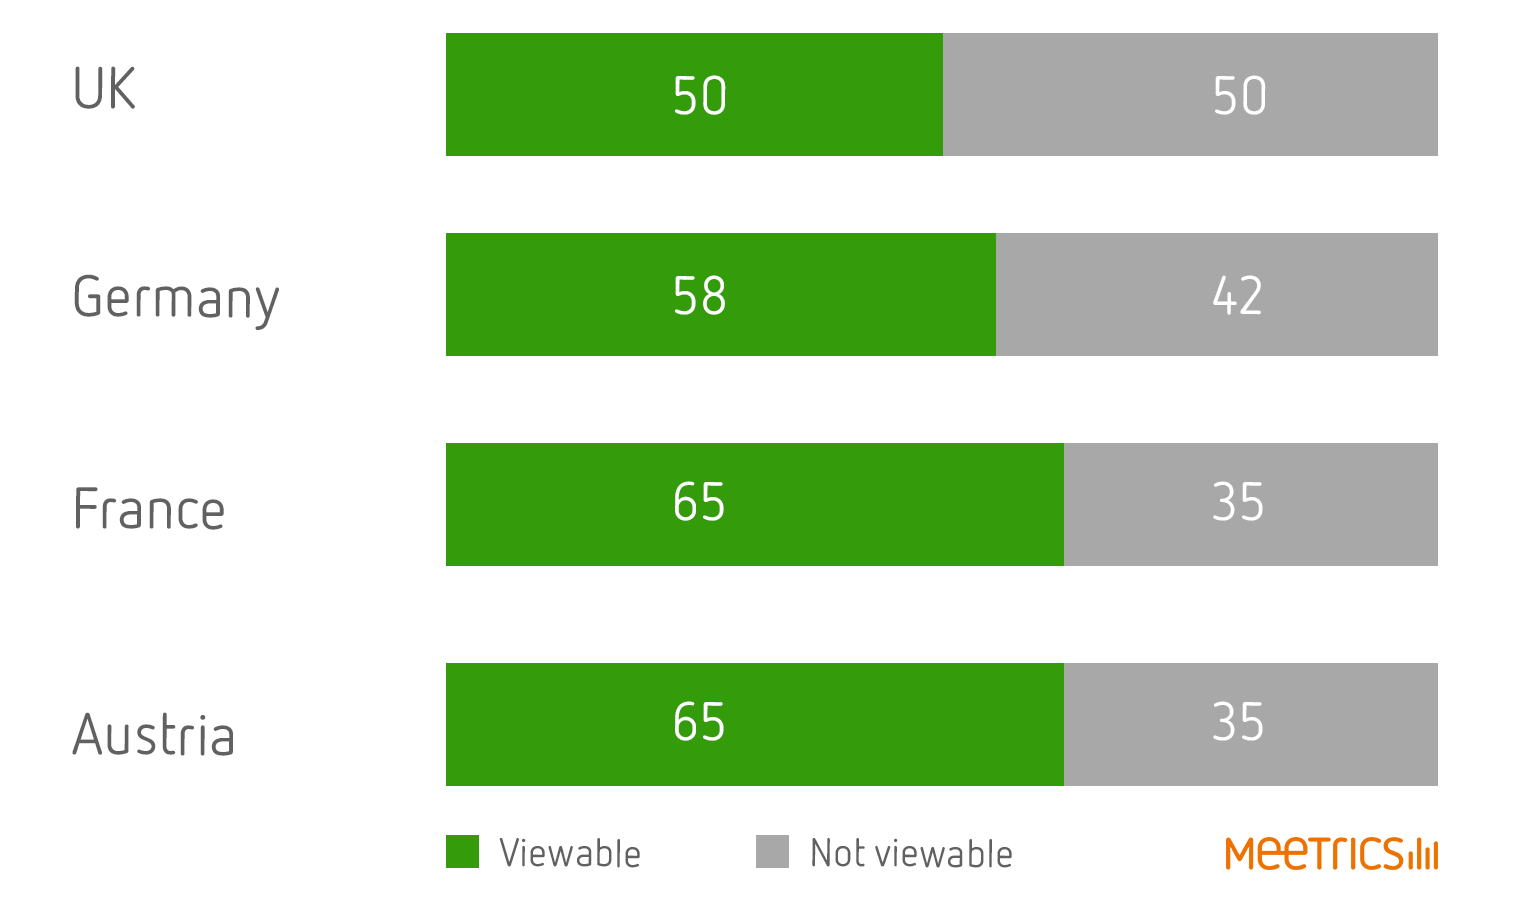 UK Viewability Rates Dropped in Q4 2015